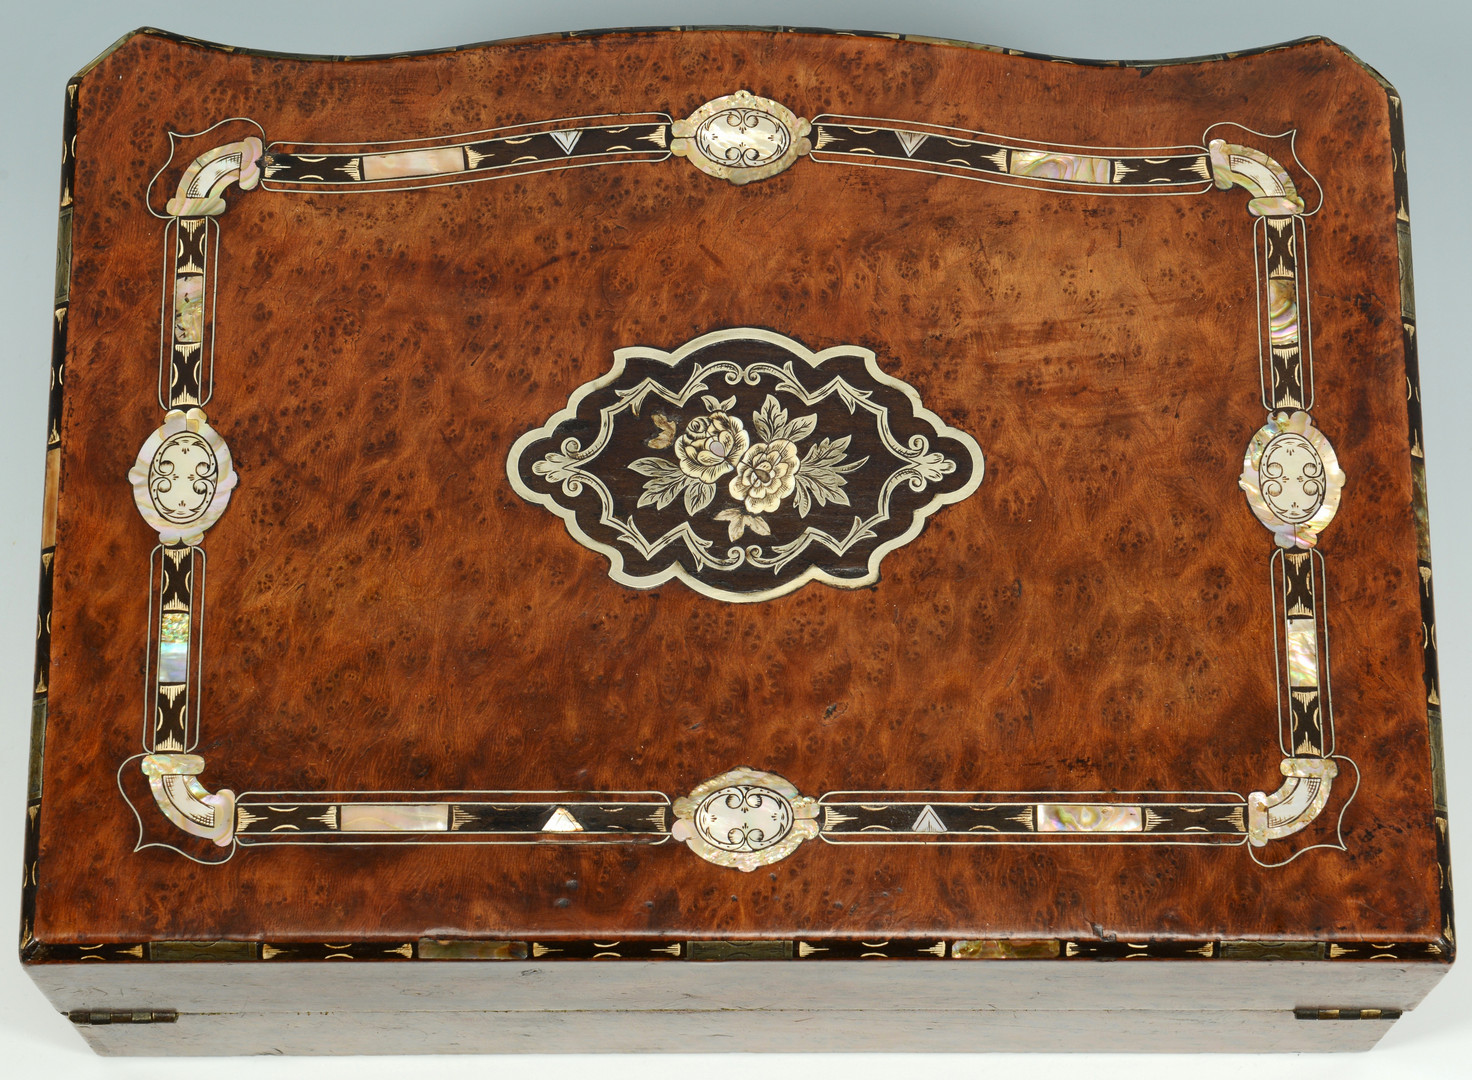 Lot 67: Two English Inlaid Boxes